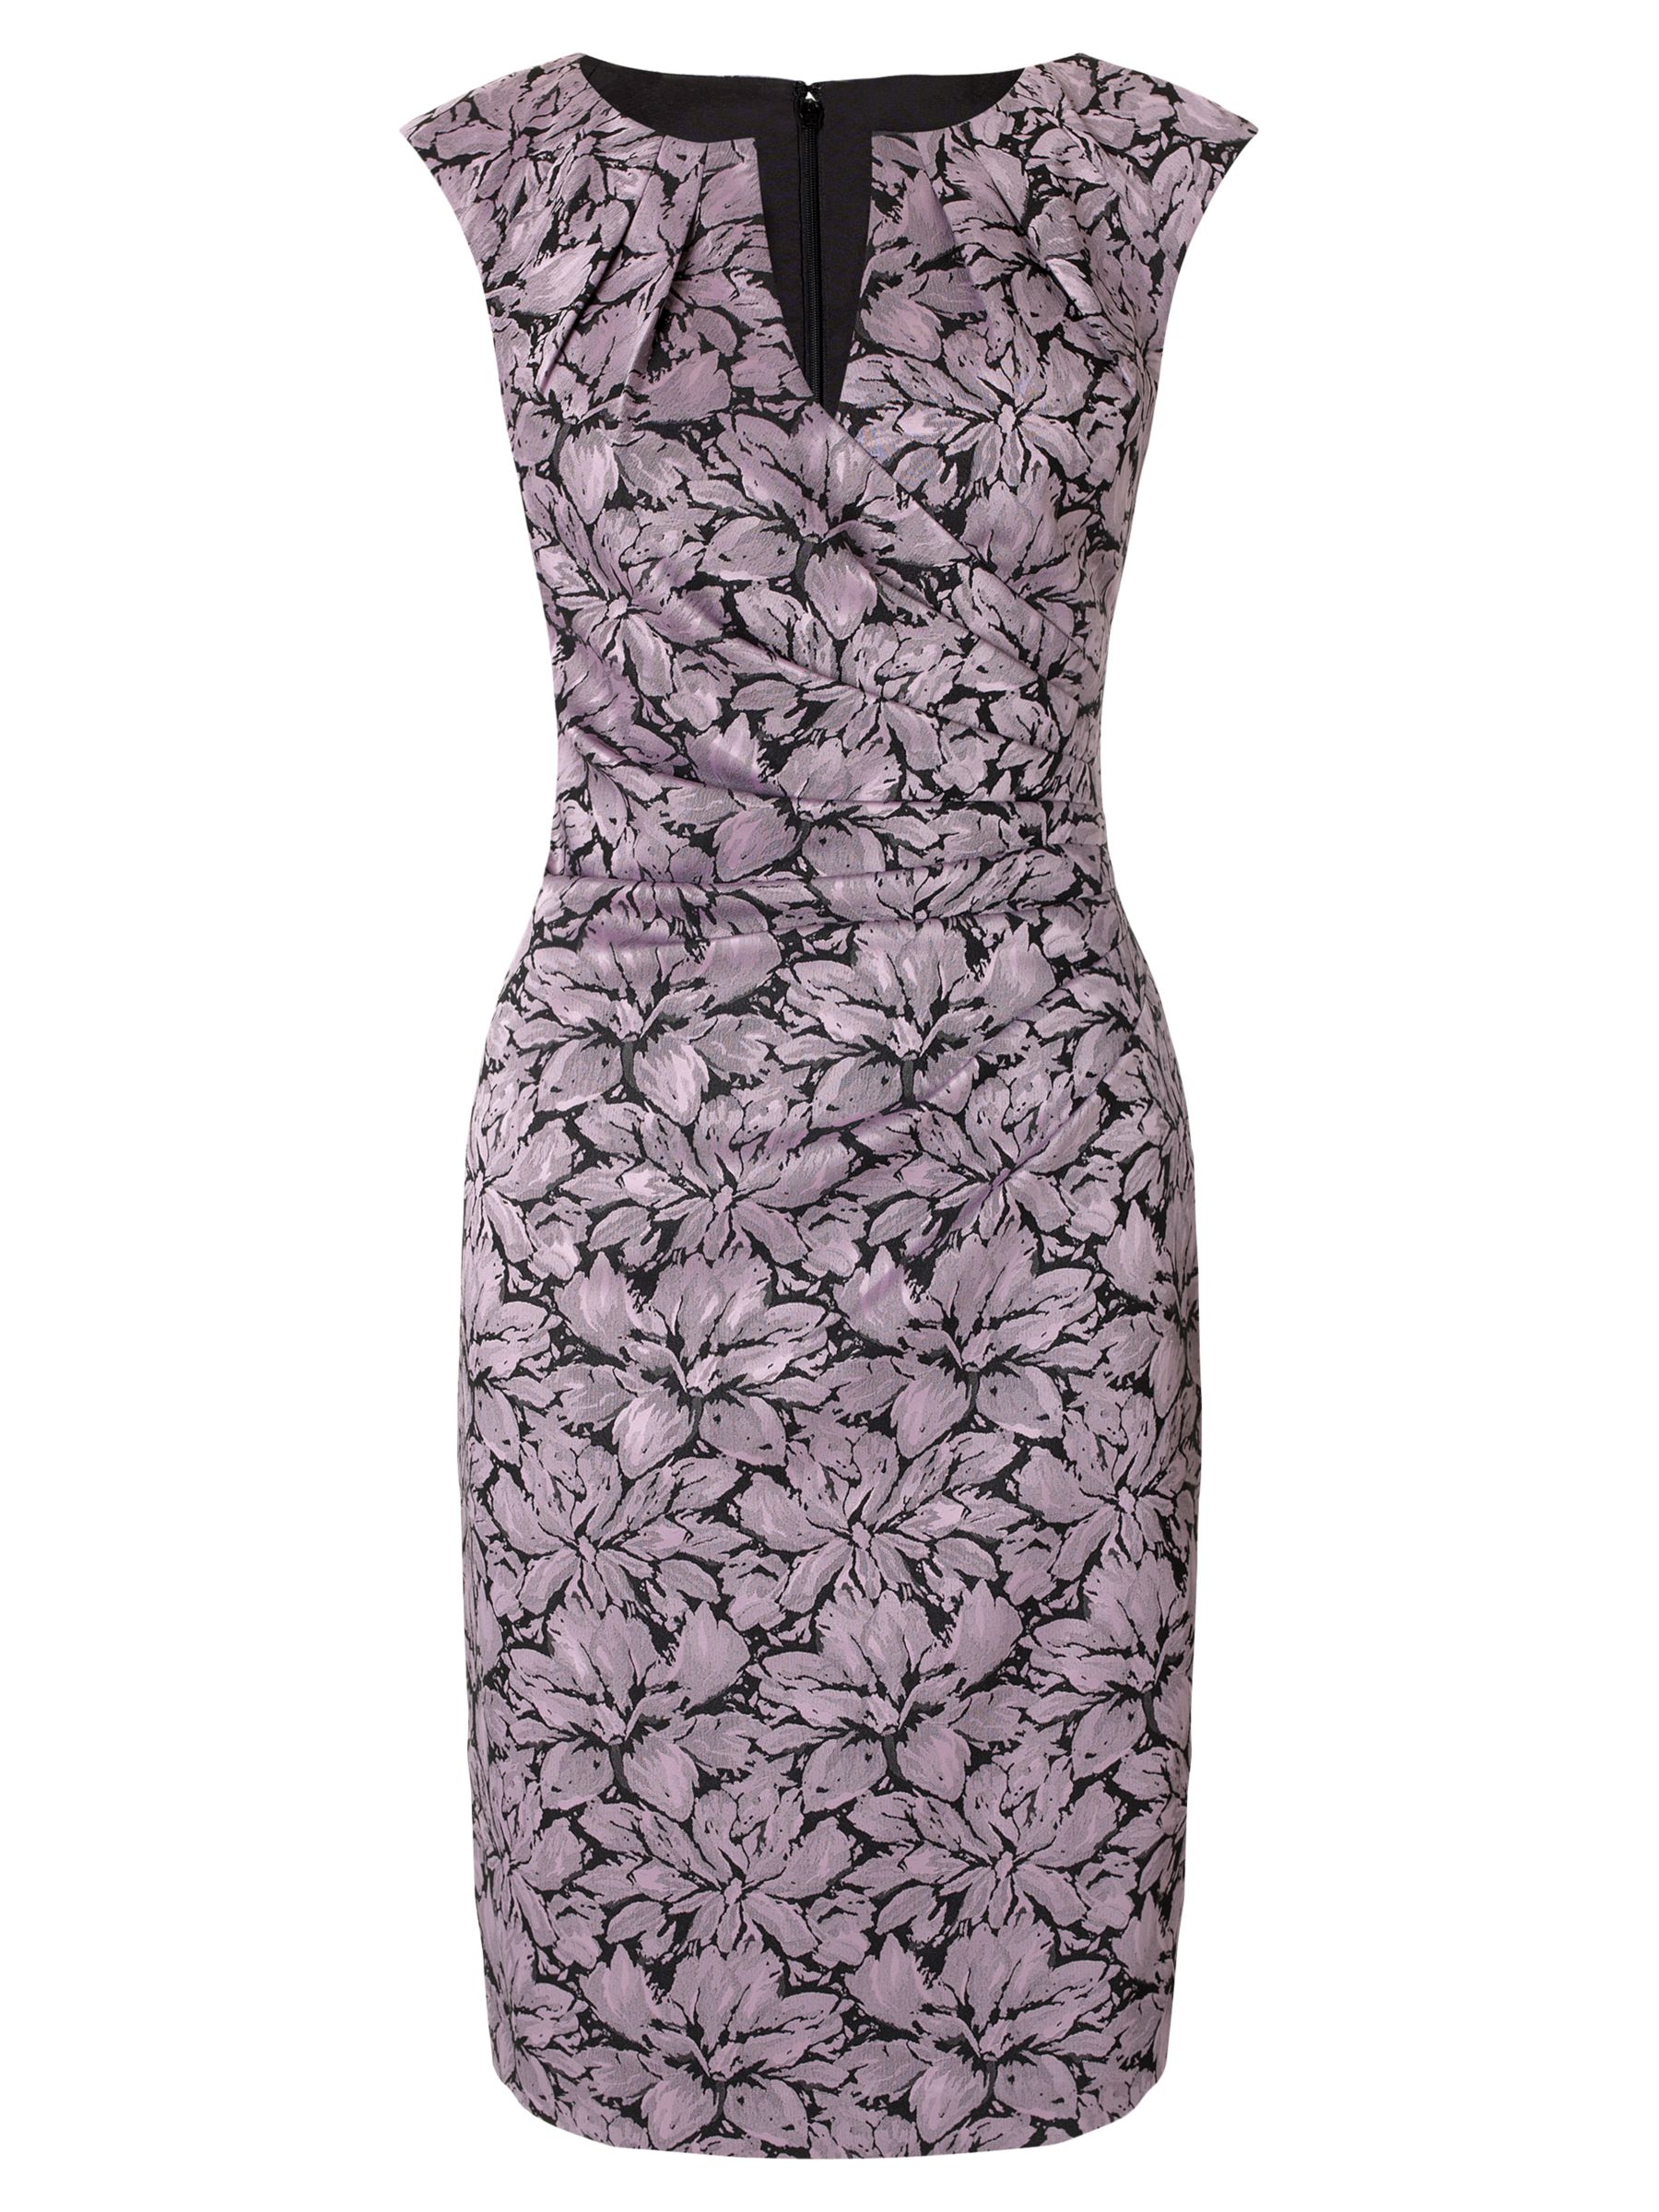 Adrianna Papell Jacquard Floral Wrap Dress, Dusty Pink at John Lewis ...